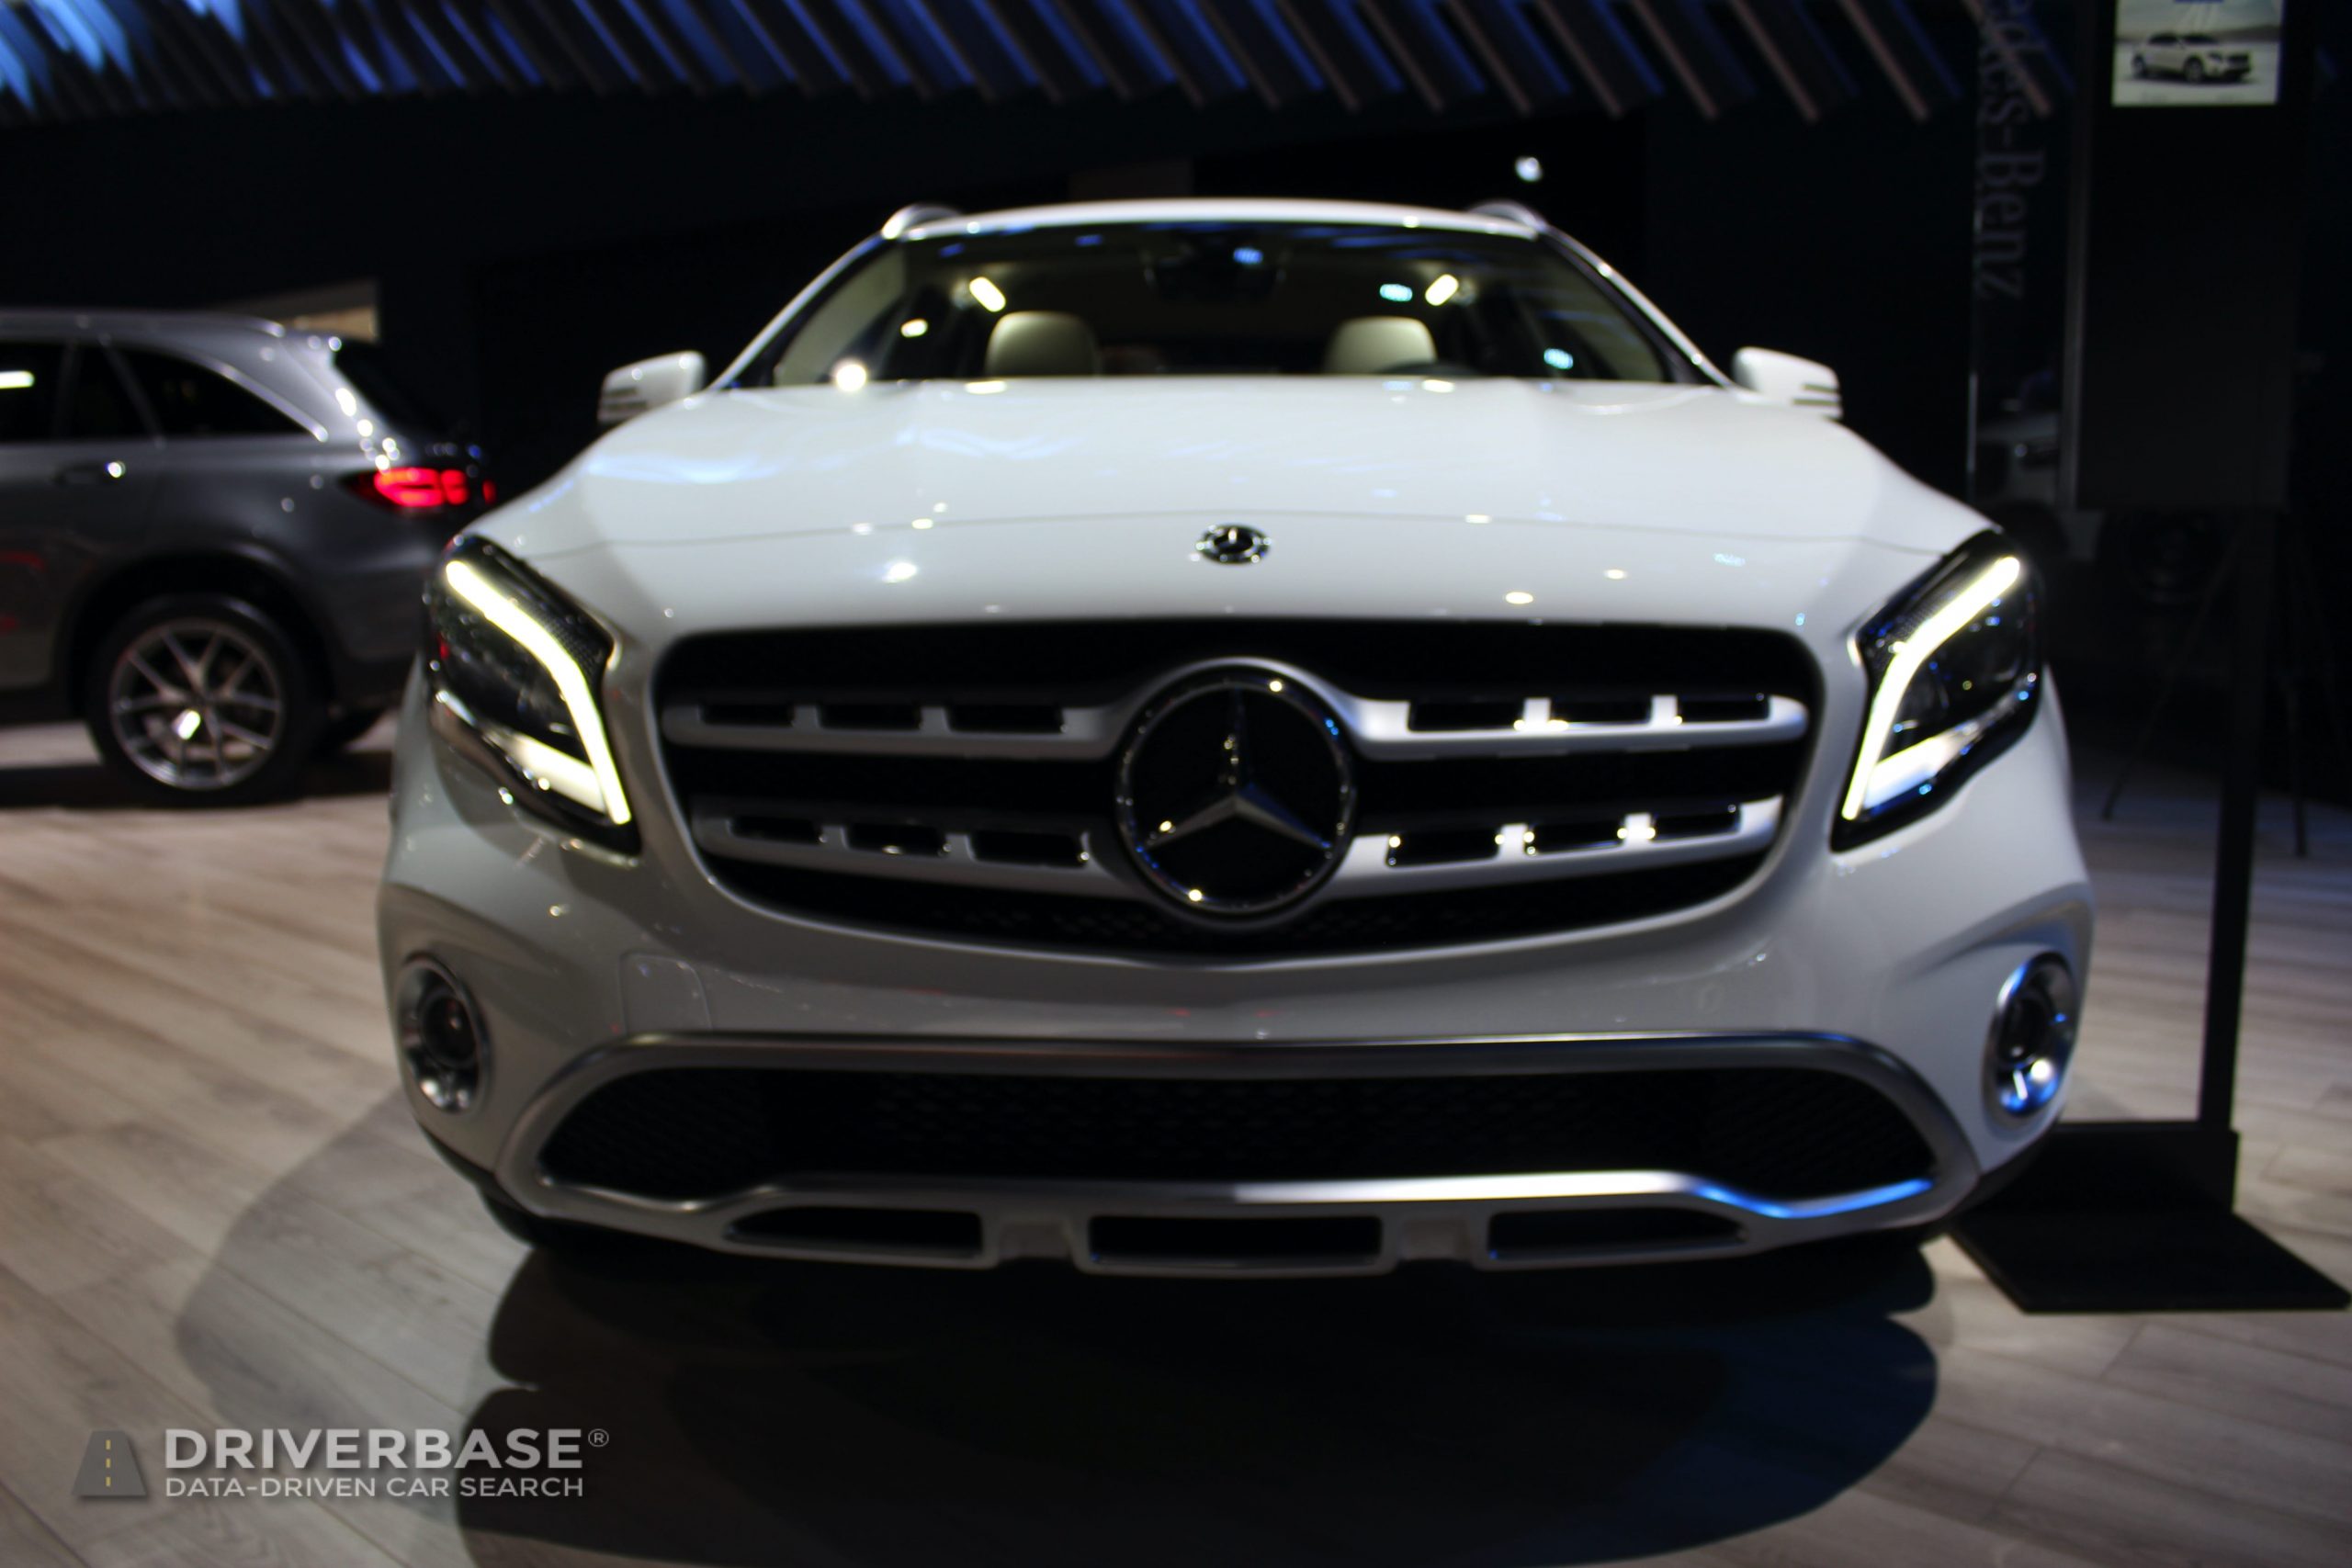 2020 Mercedes-Benz GLA 250 at the 2019 Los Angeles Auto Show